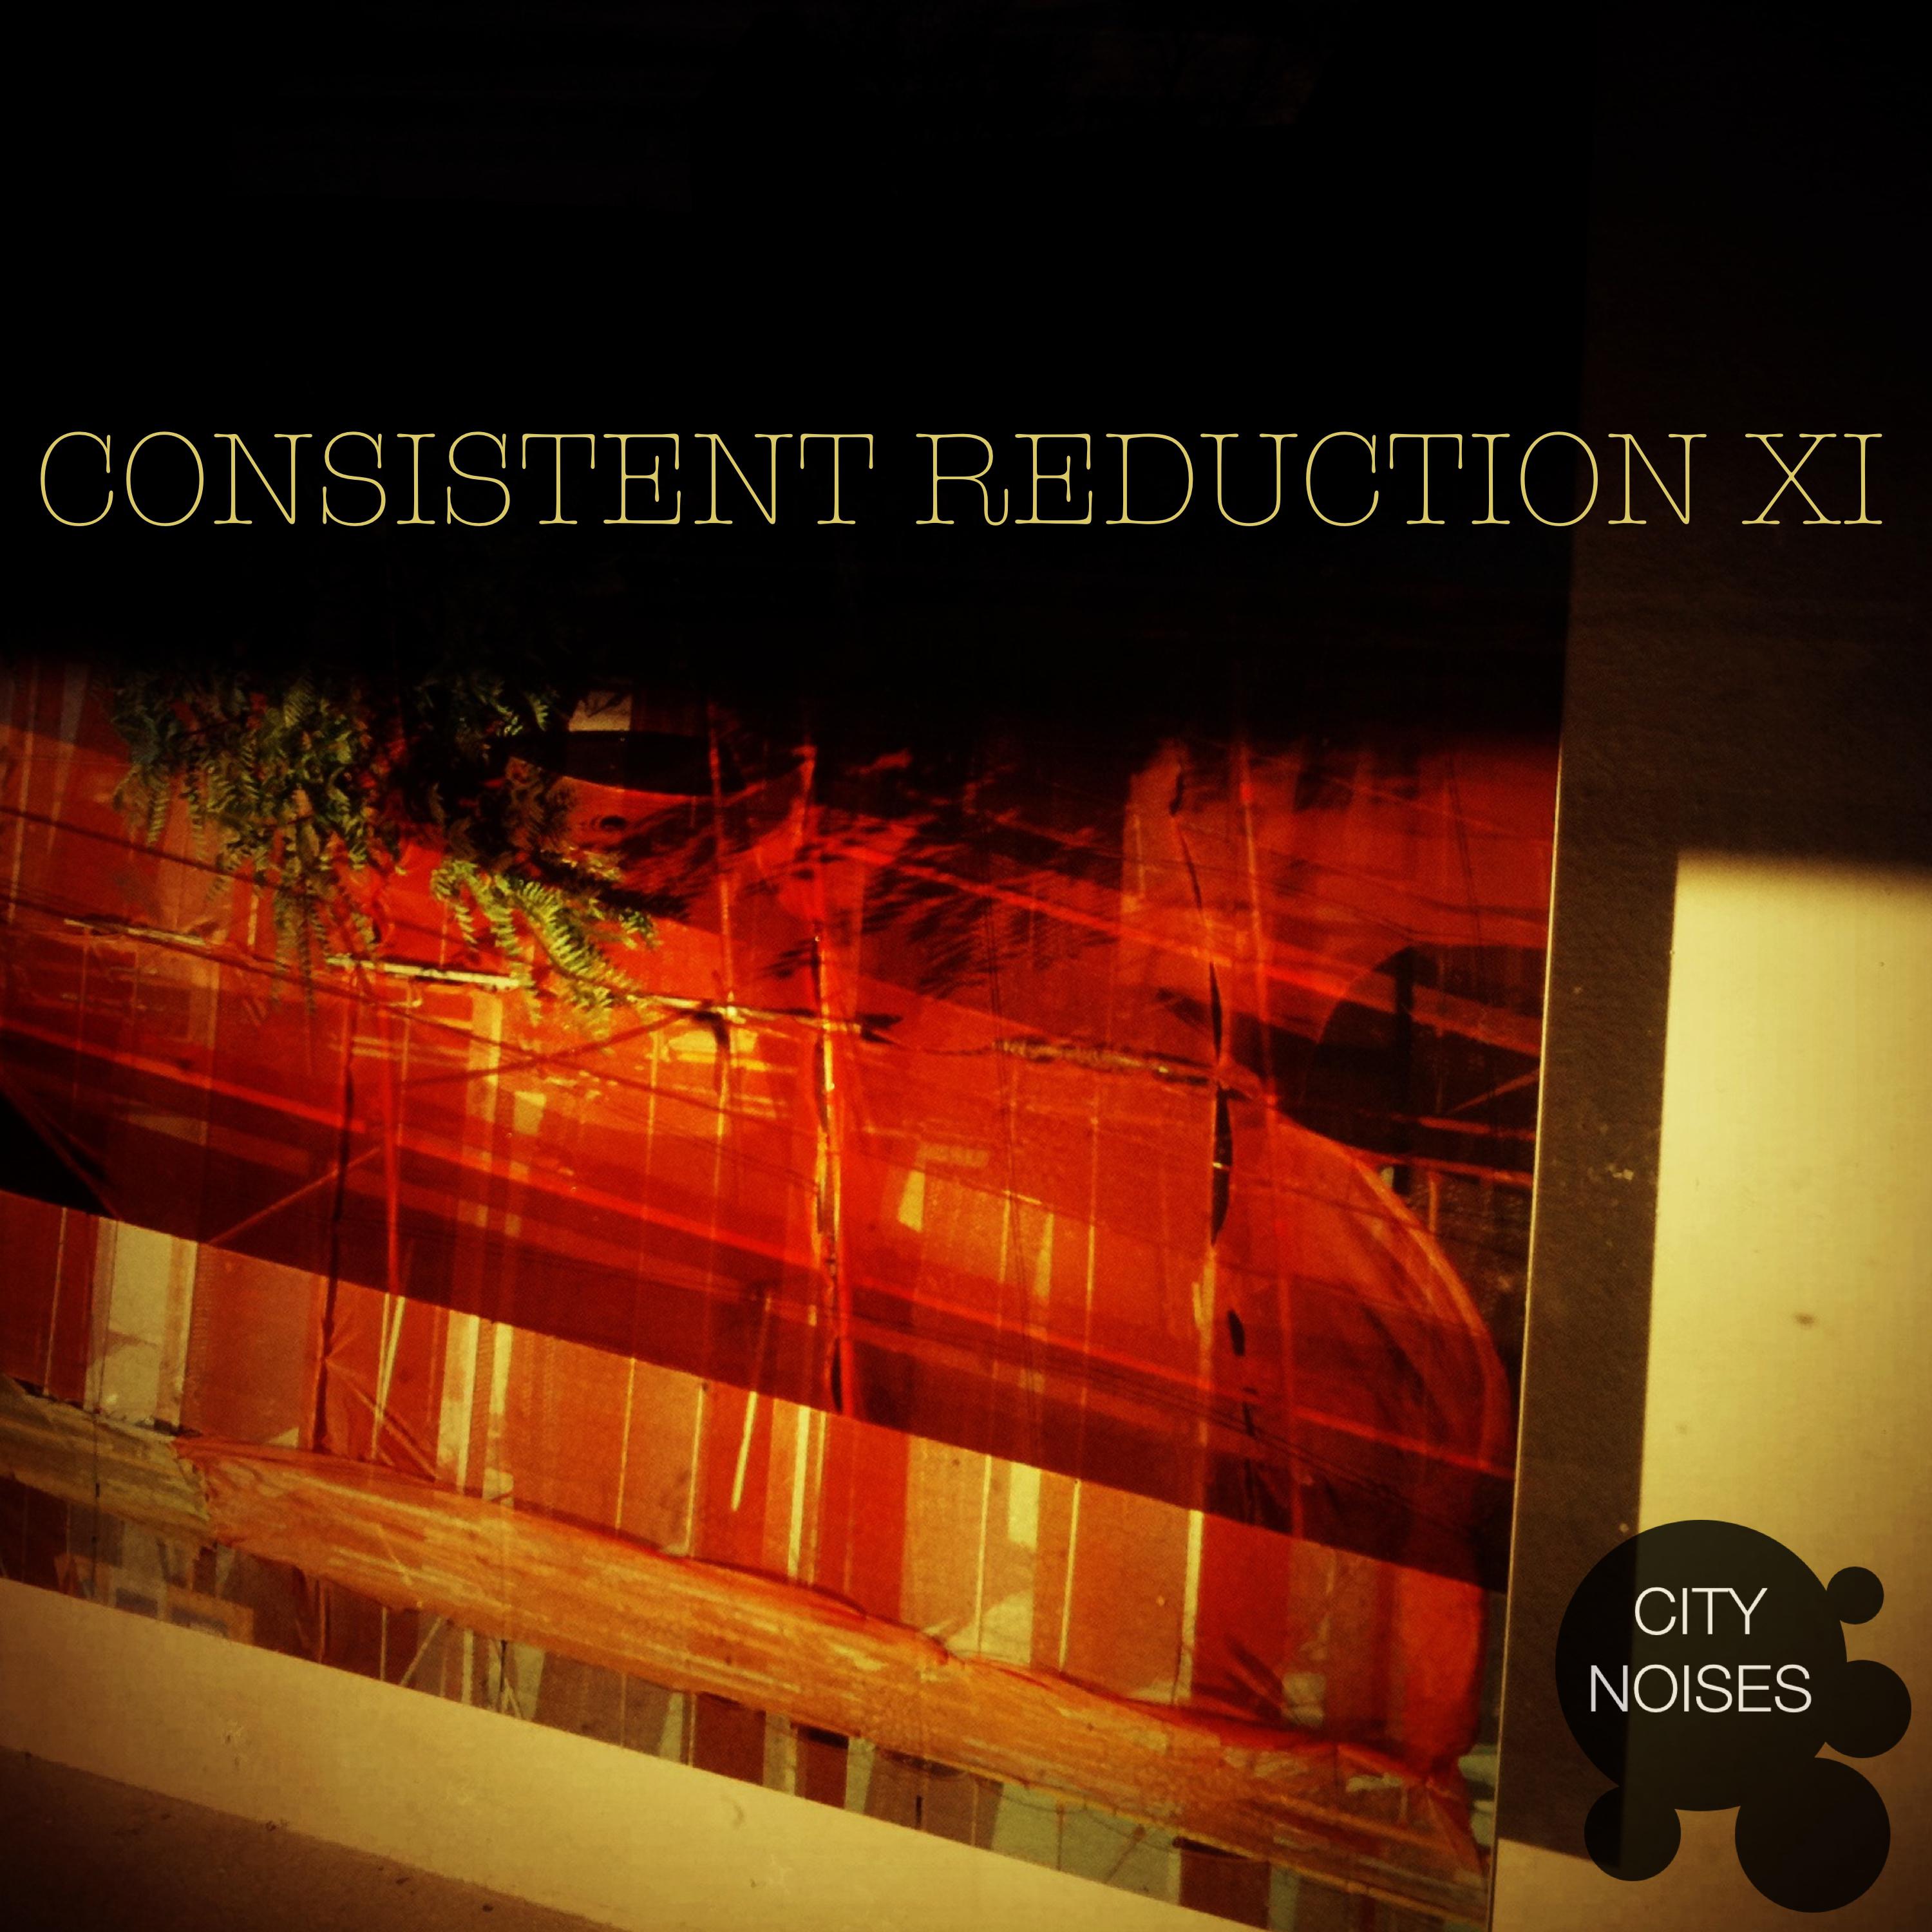 Consistent Reduction XI